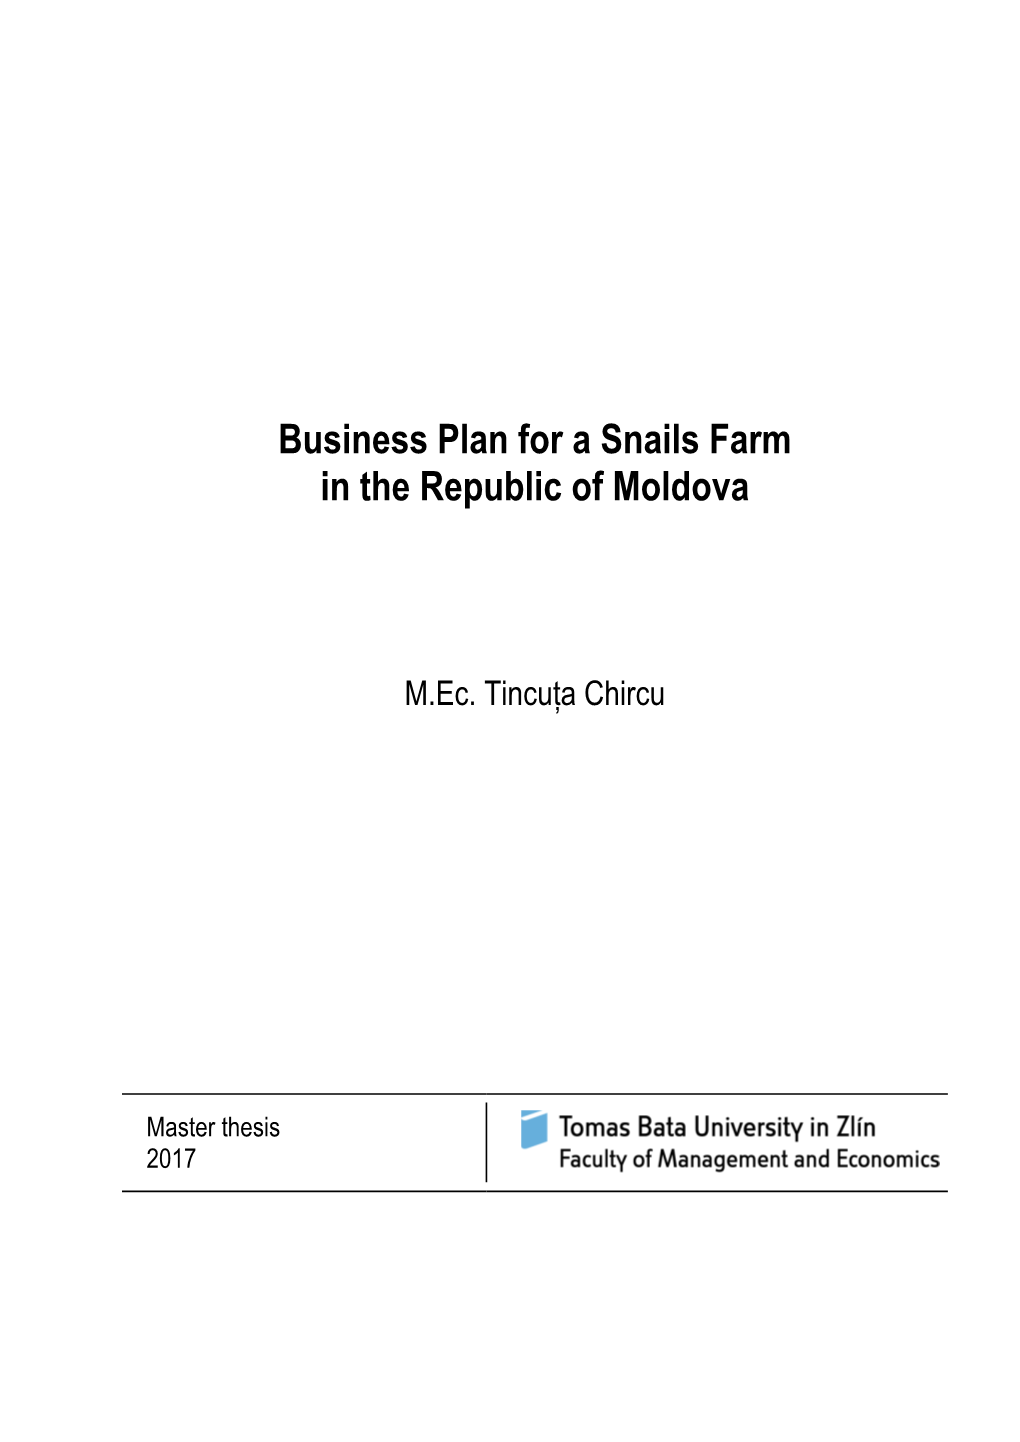 Business Plan for a Snails Farm in the Republic of Moldova